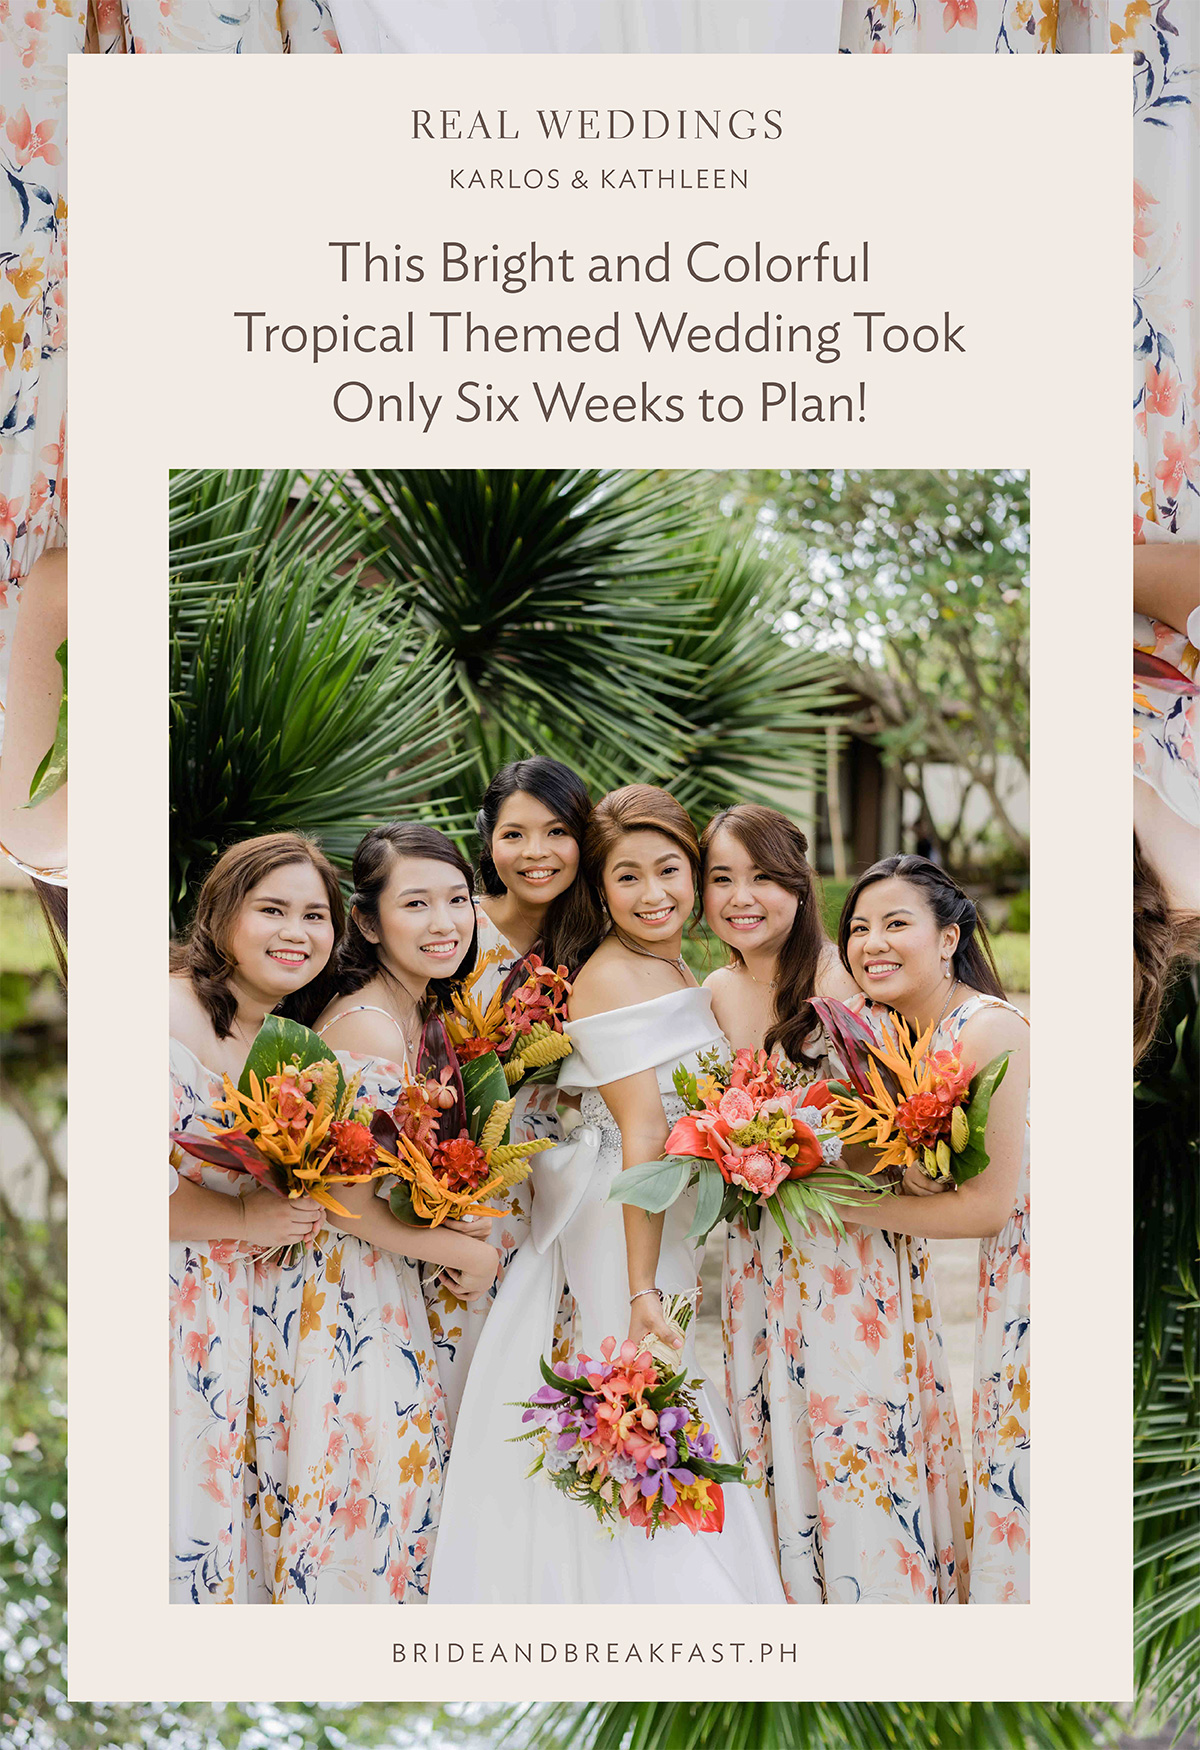 Bride and Breakfast: Real Weddings This Bright and Colorful Tropical Themed Wedding Took Only Six Weeks to Plan!